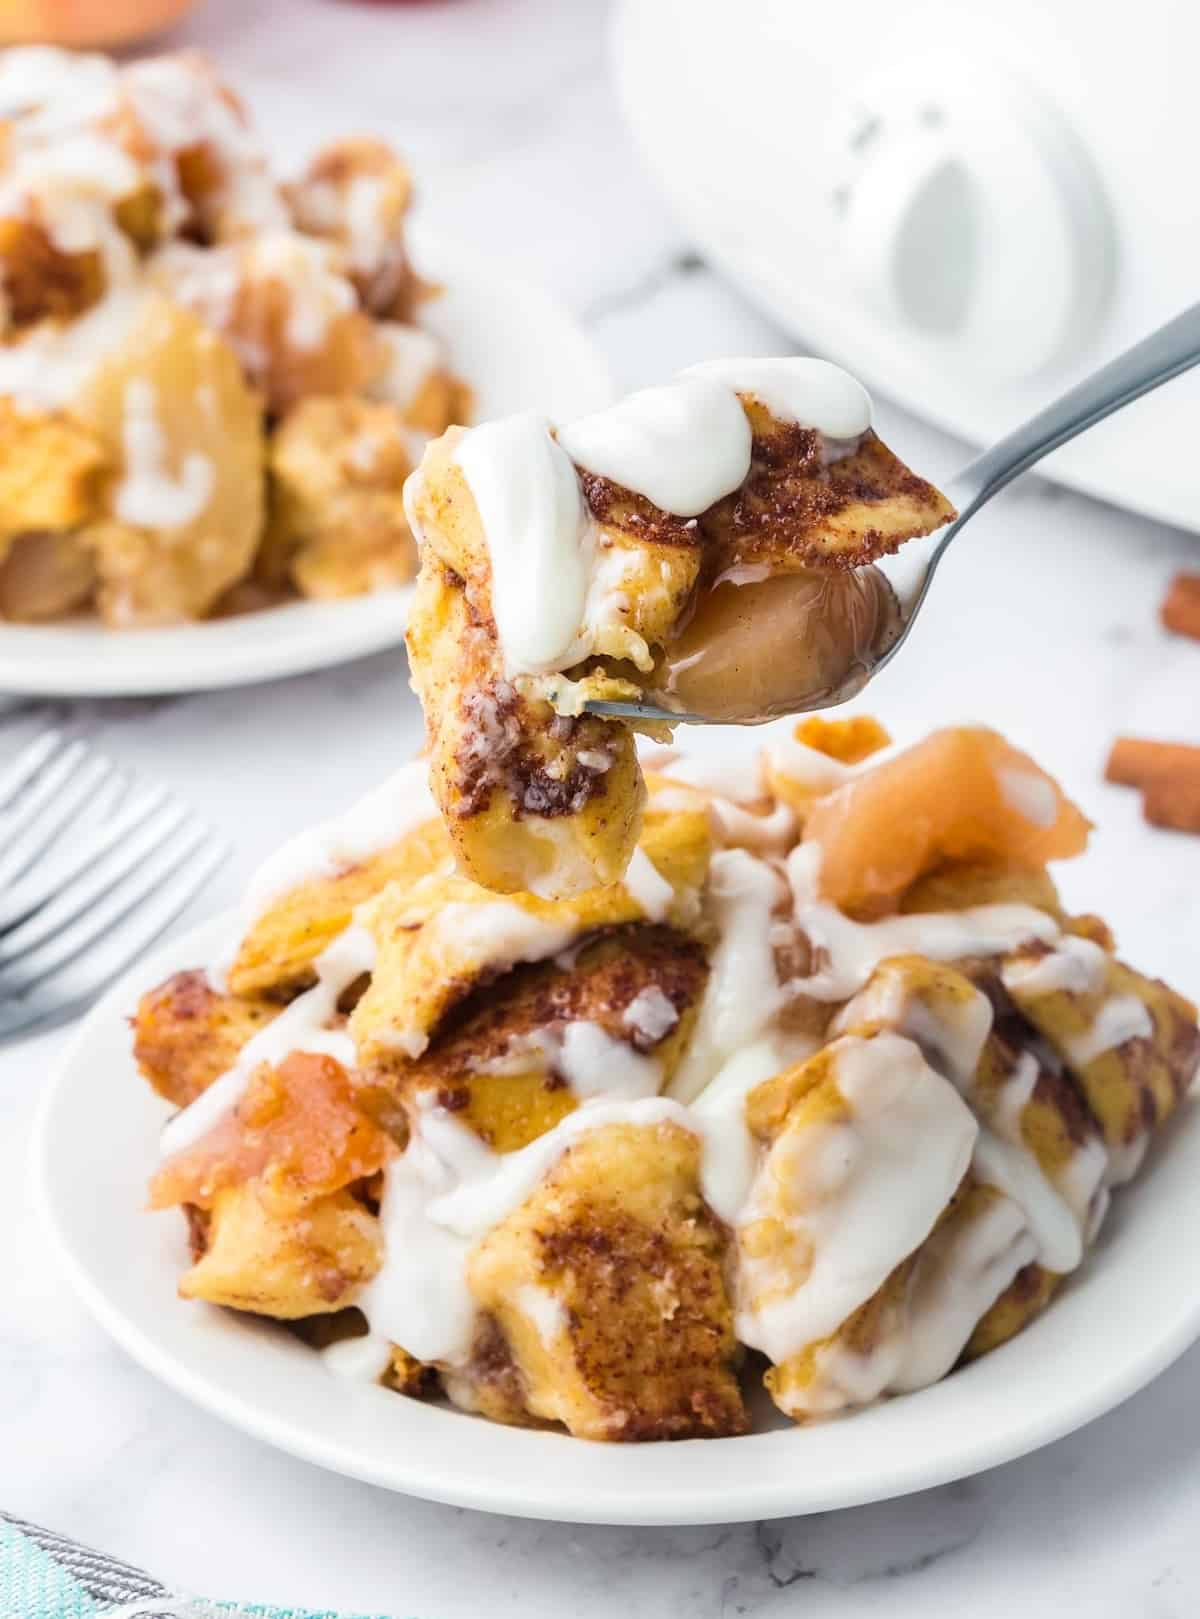 Crockpot cinnamon roll casserole on a plate and a bite picked up with a fork.